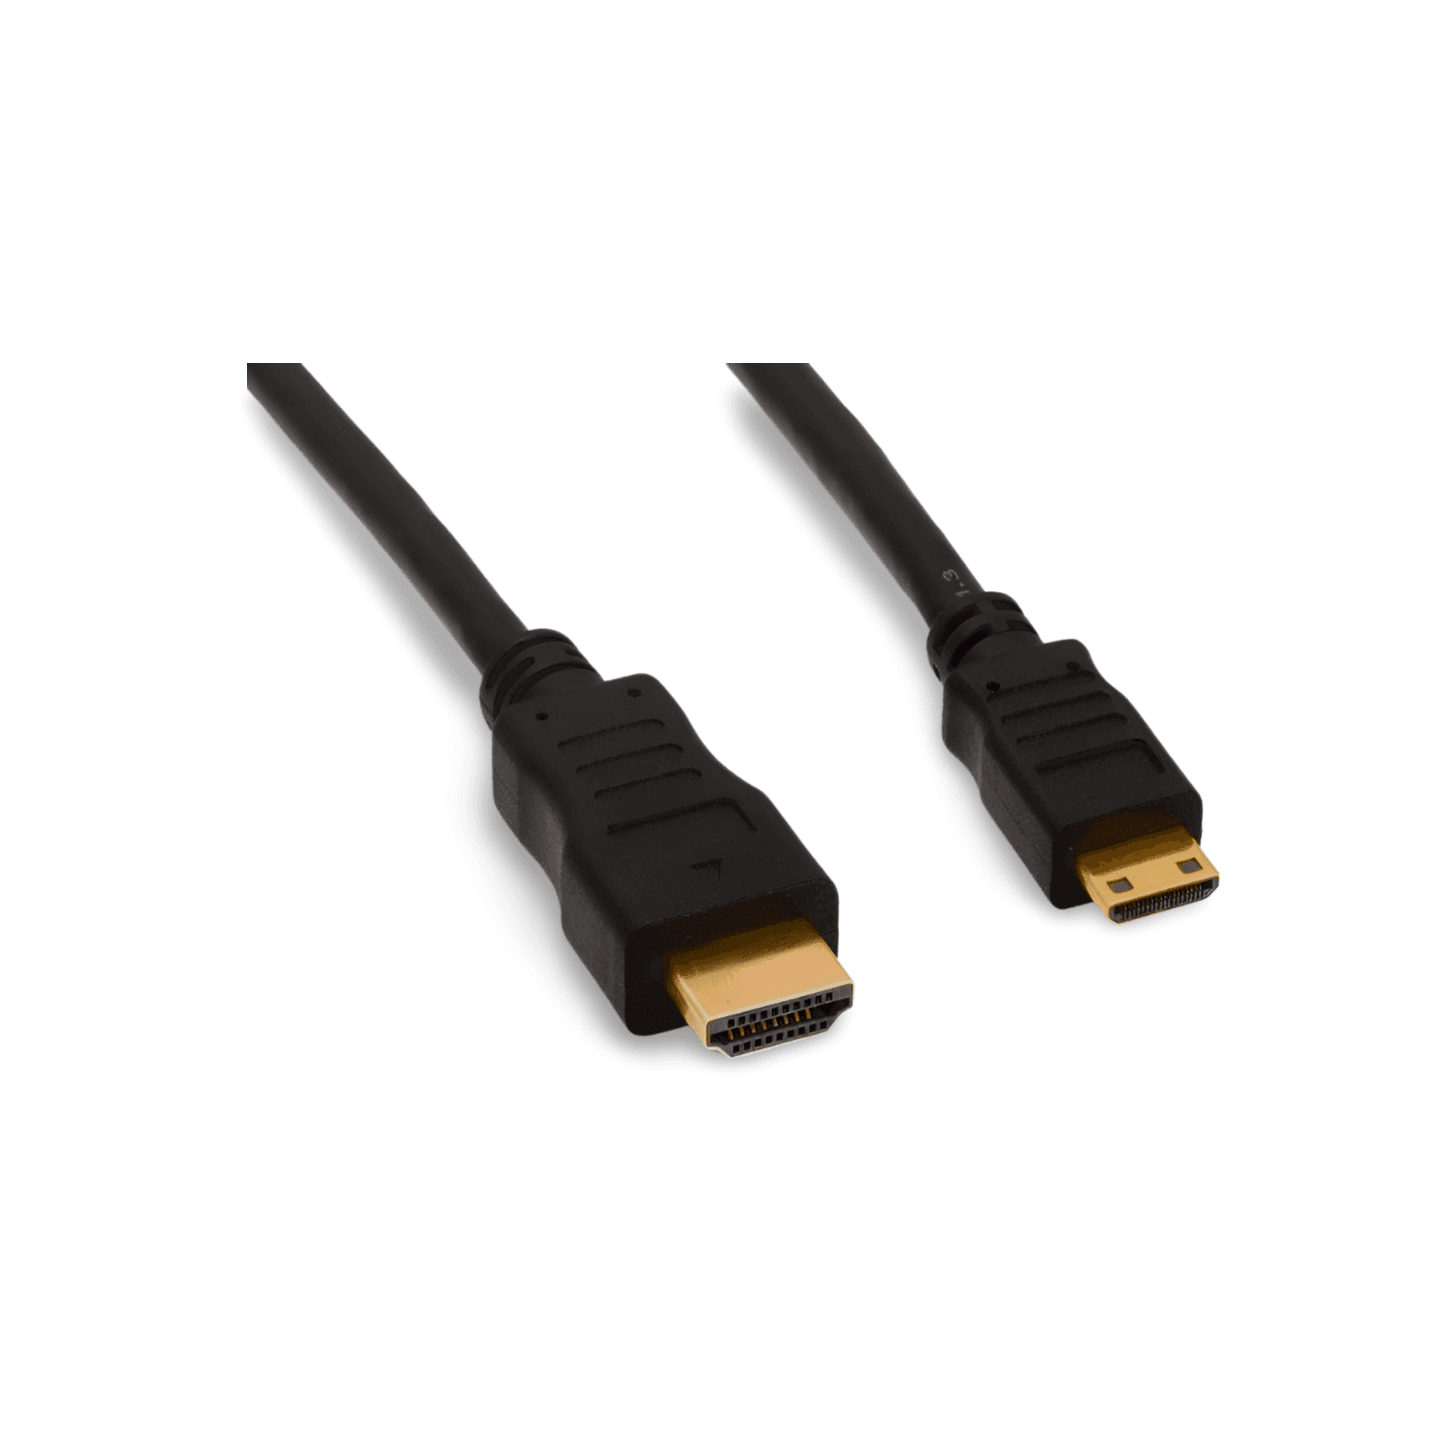 8in HDMI Type C Male to HDMI Type A Male Adapter Cable black